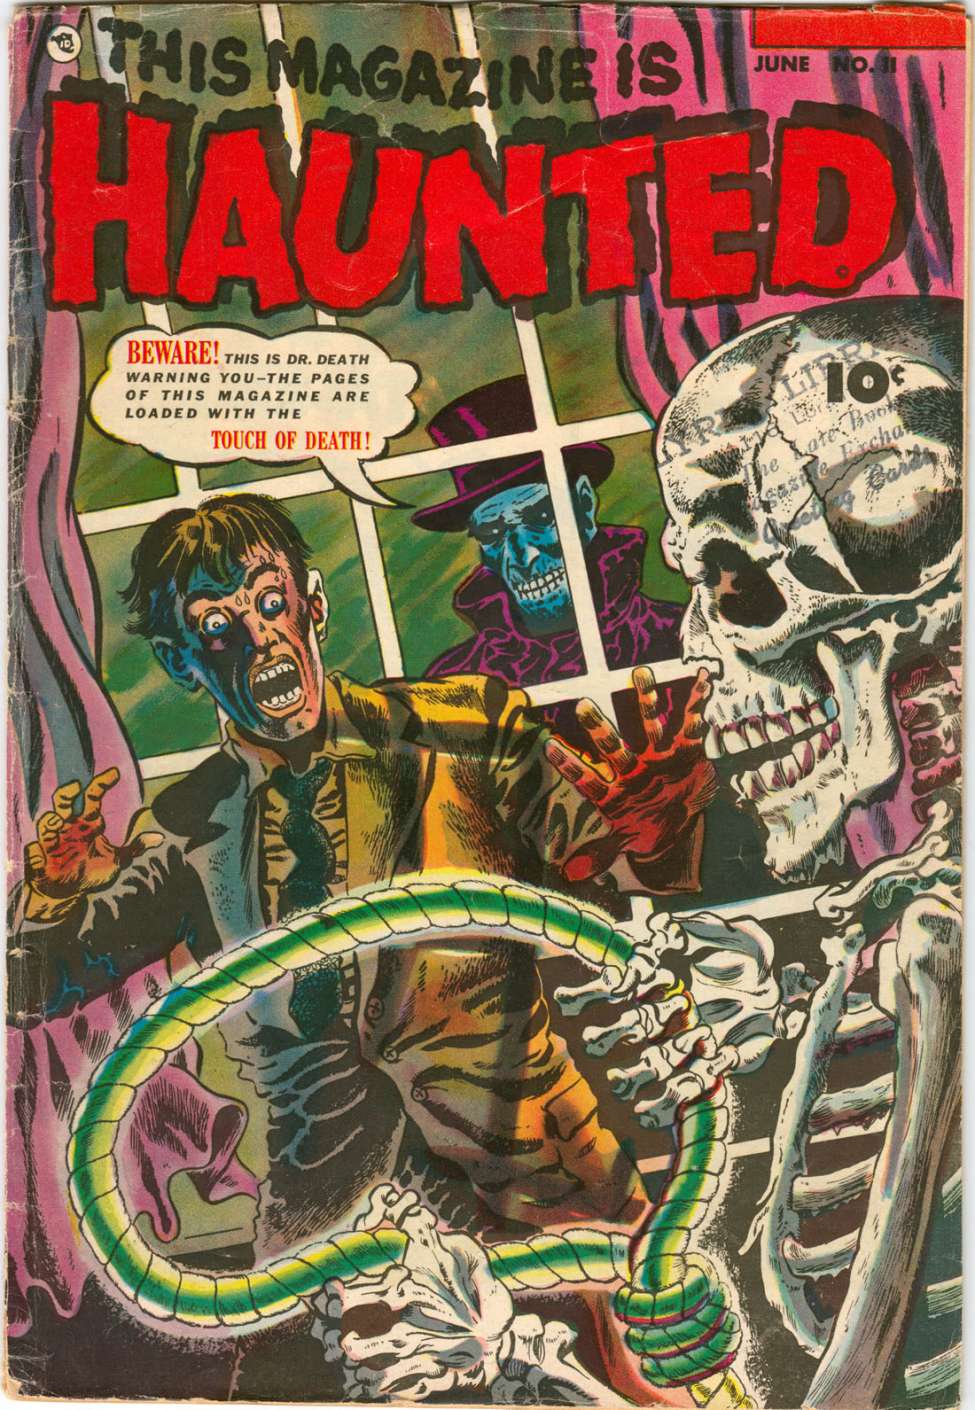 THIS MAGAZINE IS HAUNTED 21 ISSUES VINTAGE COMIC BOOKS PDF FILES ON CD 